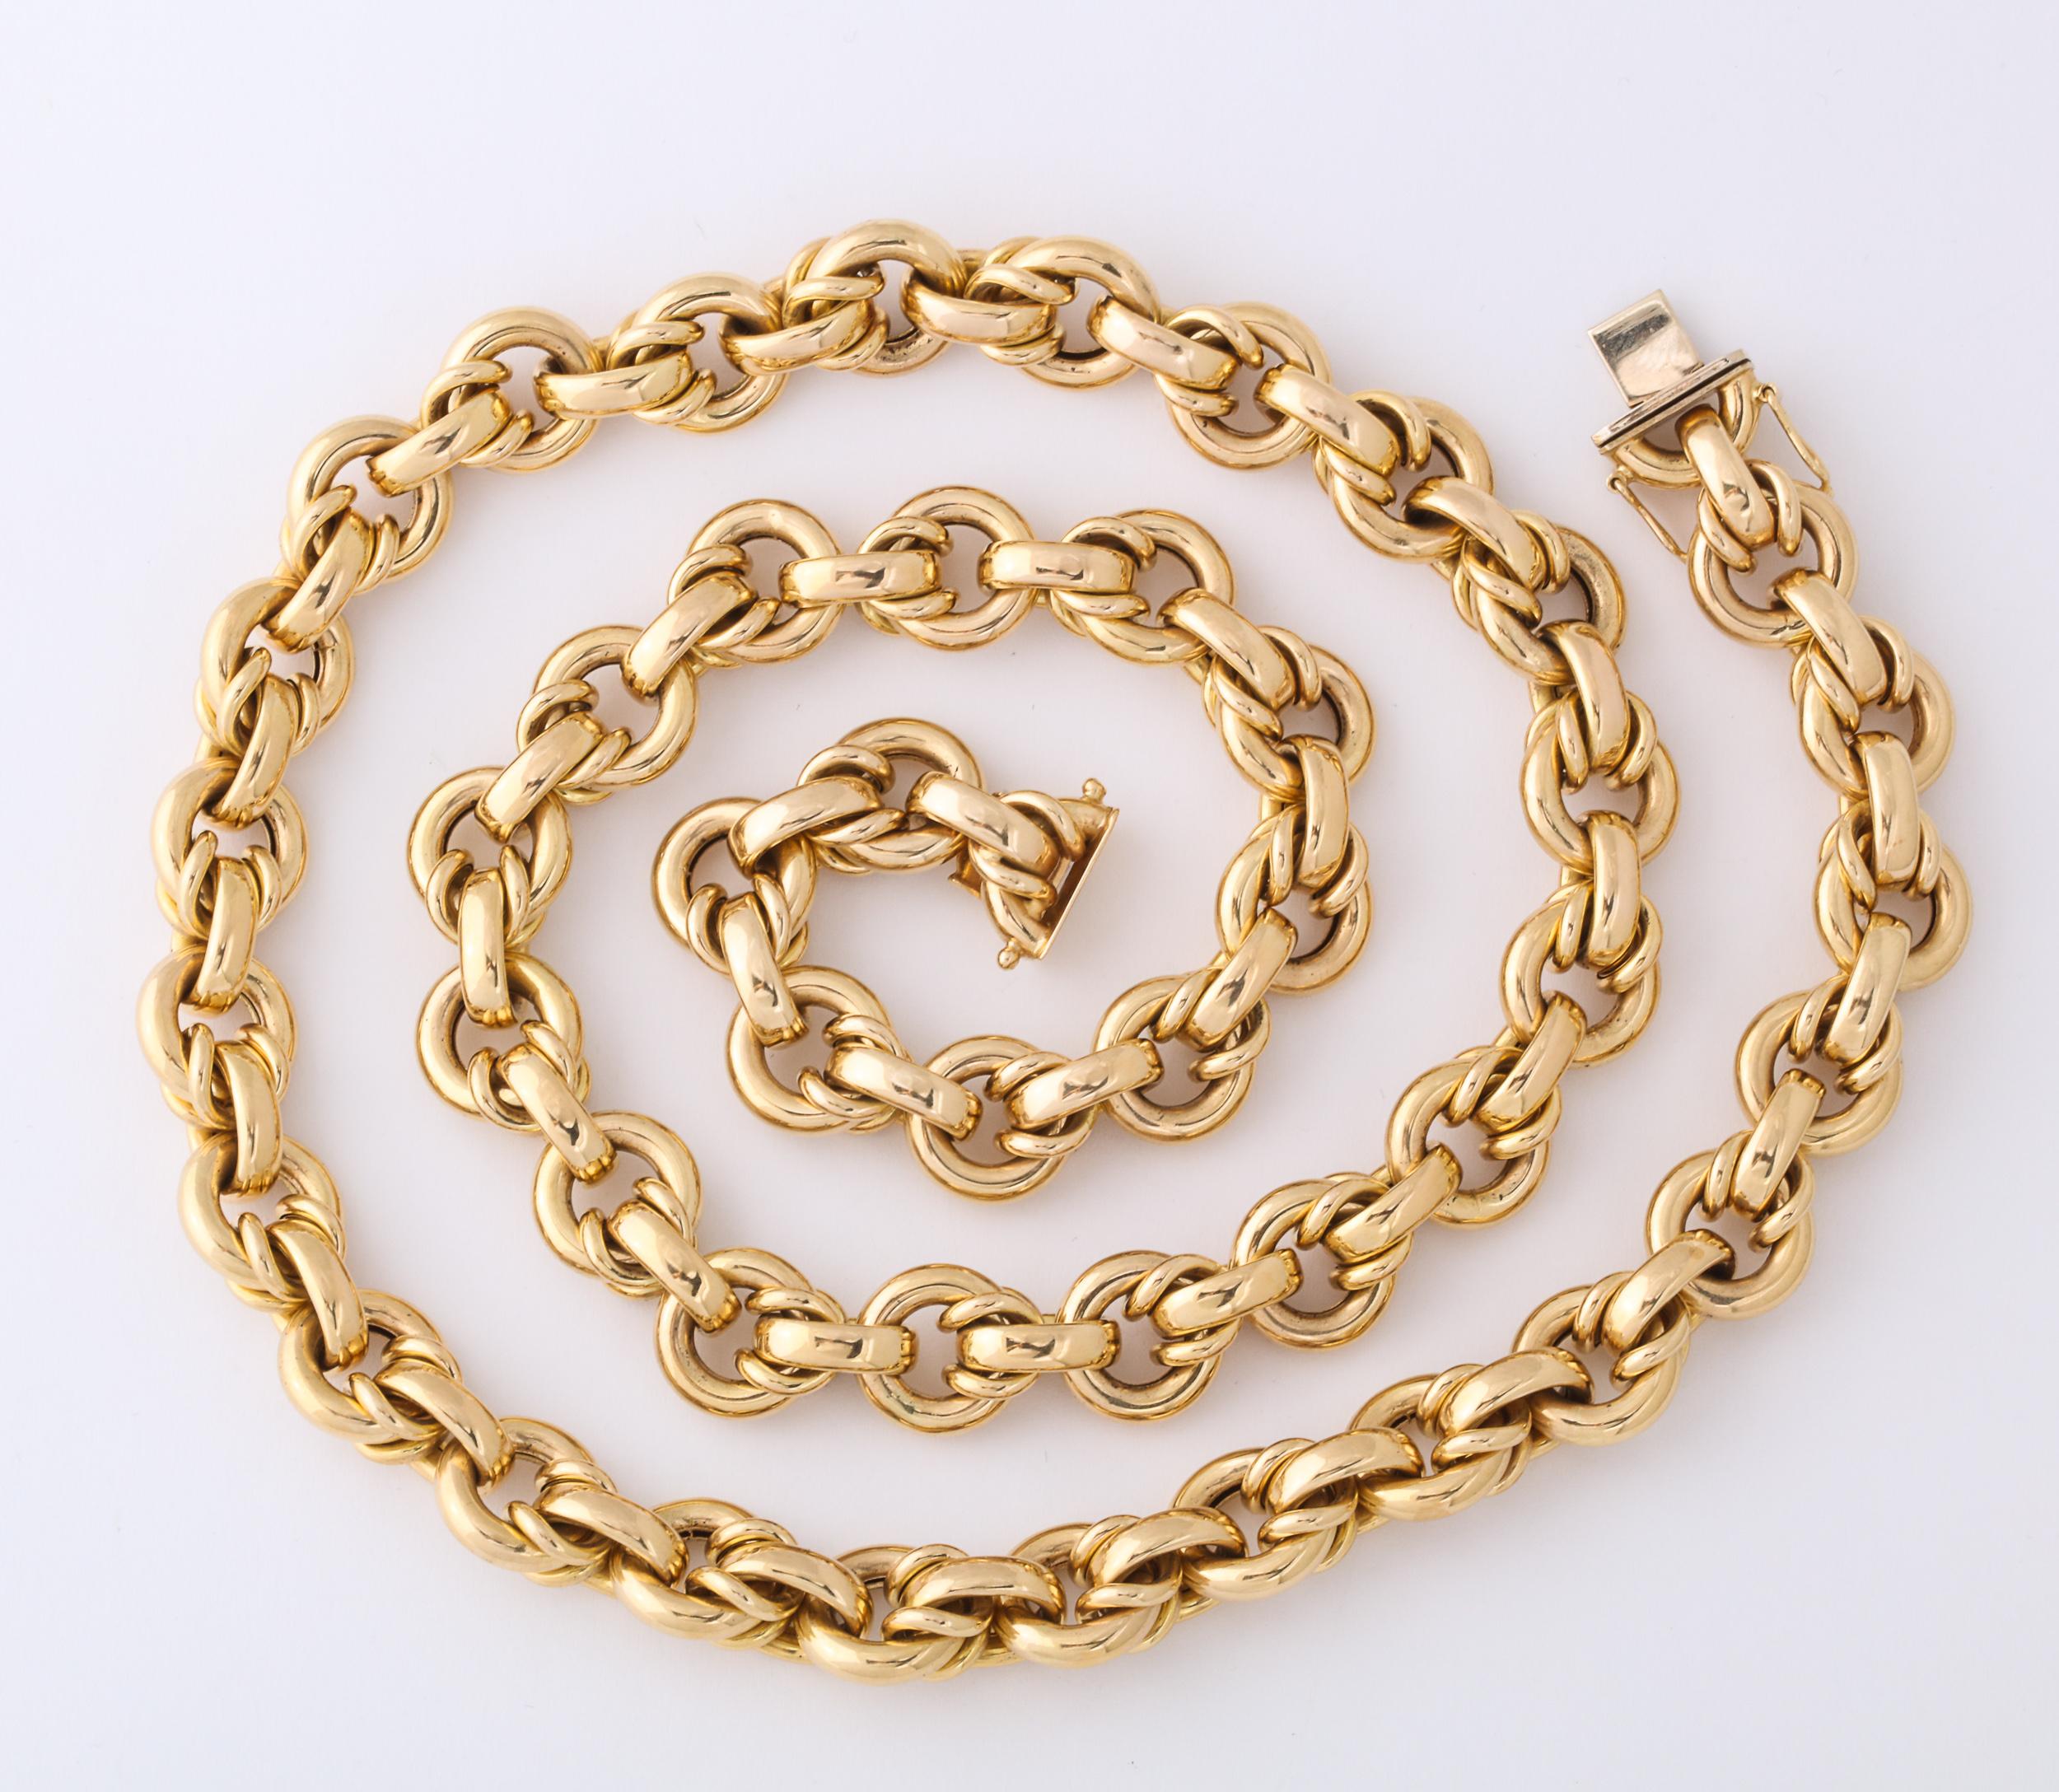 Handsome 14kt Yellow Gold Round link Chain with bar and interlocking connections.  Very 1960s.  Heavy & long chain which can be doubled or worn long - with or without a Pendant Brooch to dress it up or dress it upeven  a notch further.  Marked CIT